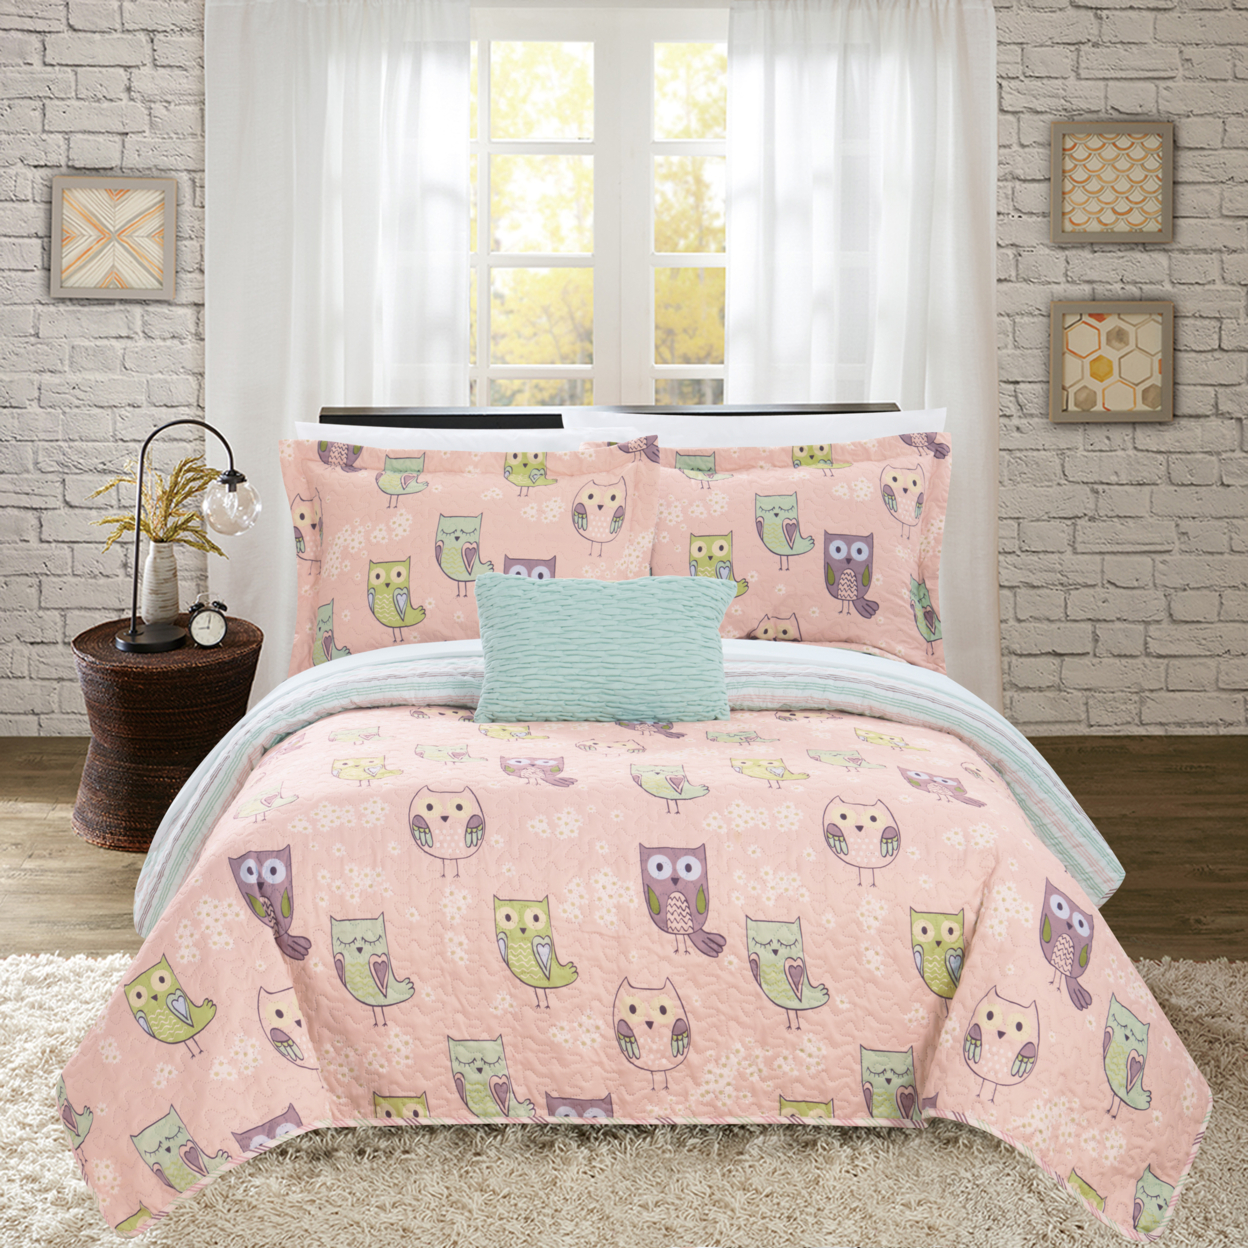 Owl Farm 4 Piece Reversible Quilt Set Cute It's A Hoot Owl Friends Youth Design Bed In A Bag - Pink, Twin